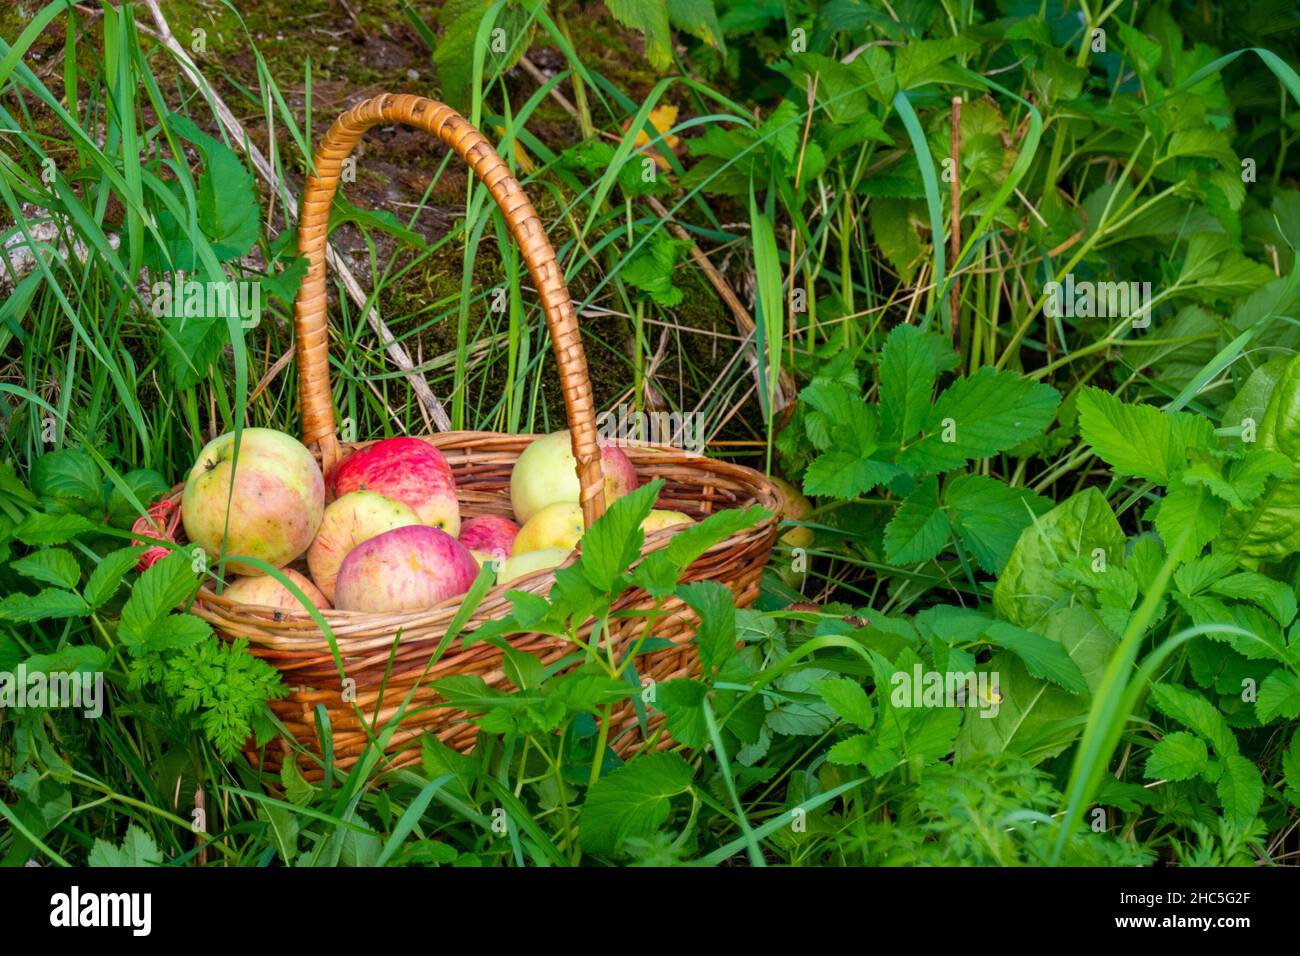 Organic apple harvest, basket of freshly harvested apples with natural blemishes and spots. Red and green freshly picked apples in basket on green gra Stock Photo